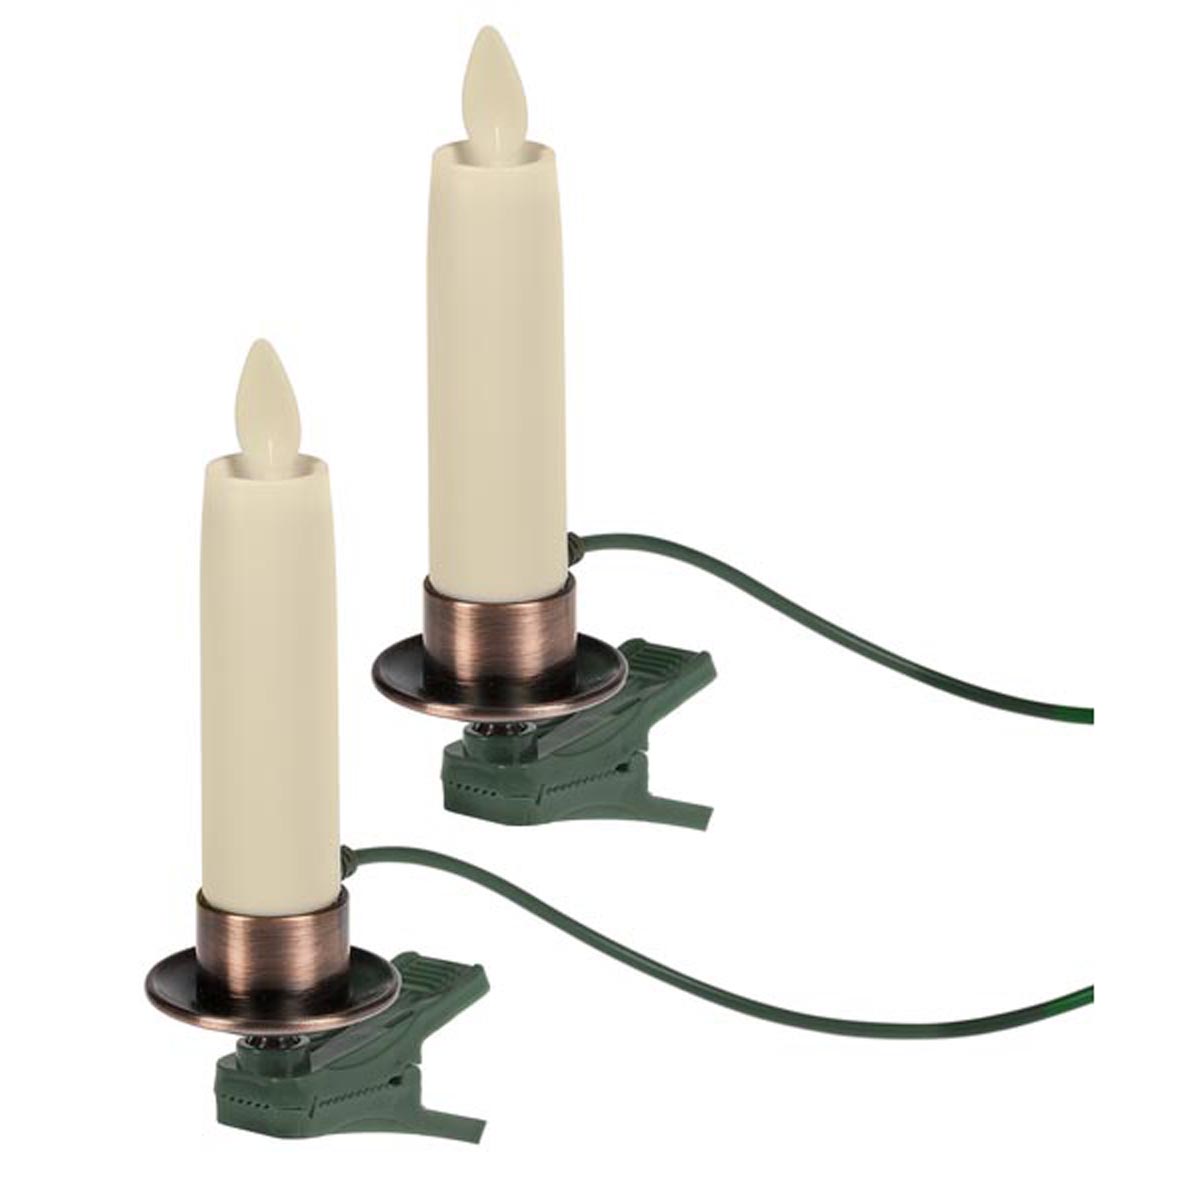 Additional LED Clip Taper Ornaments w/ Connecting Cord (2 pc. set)